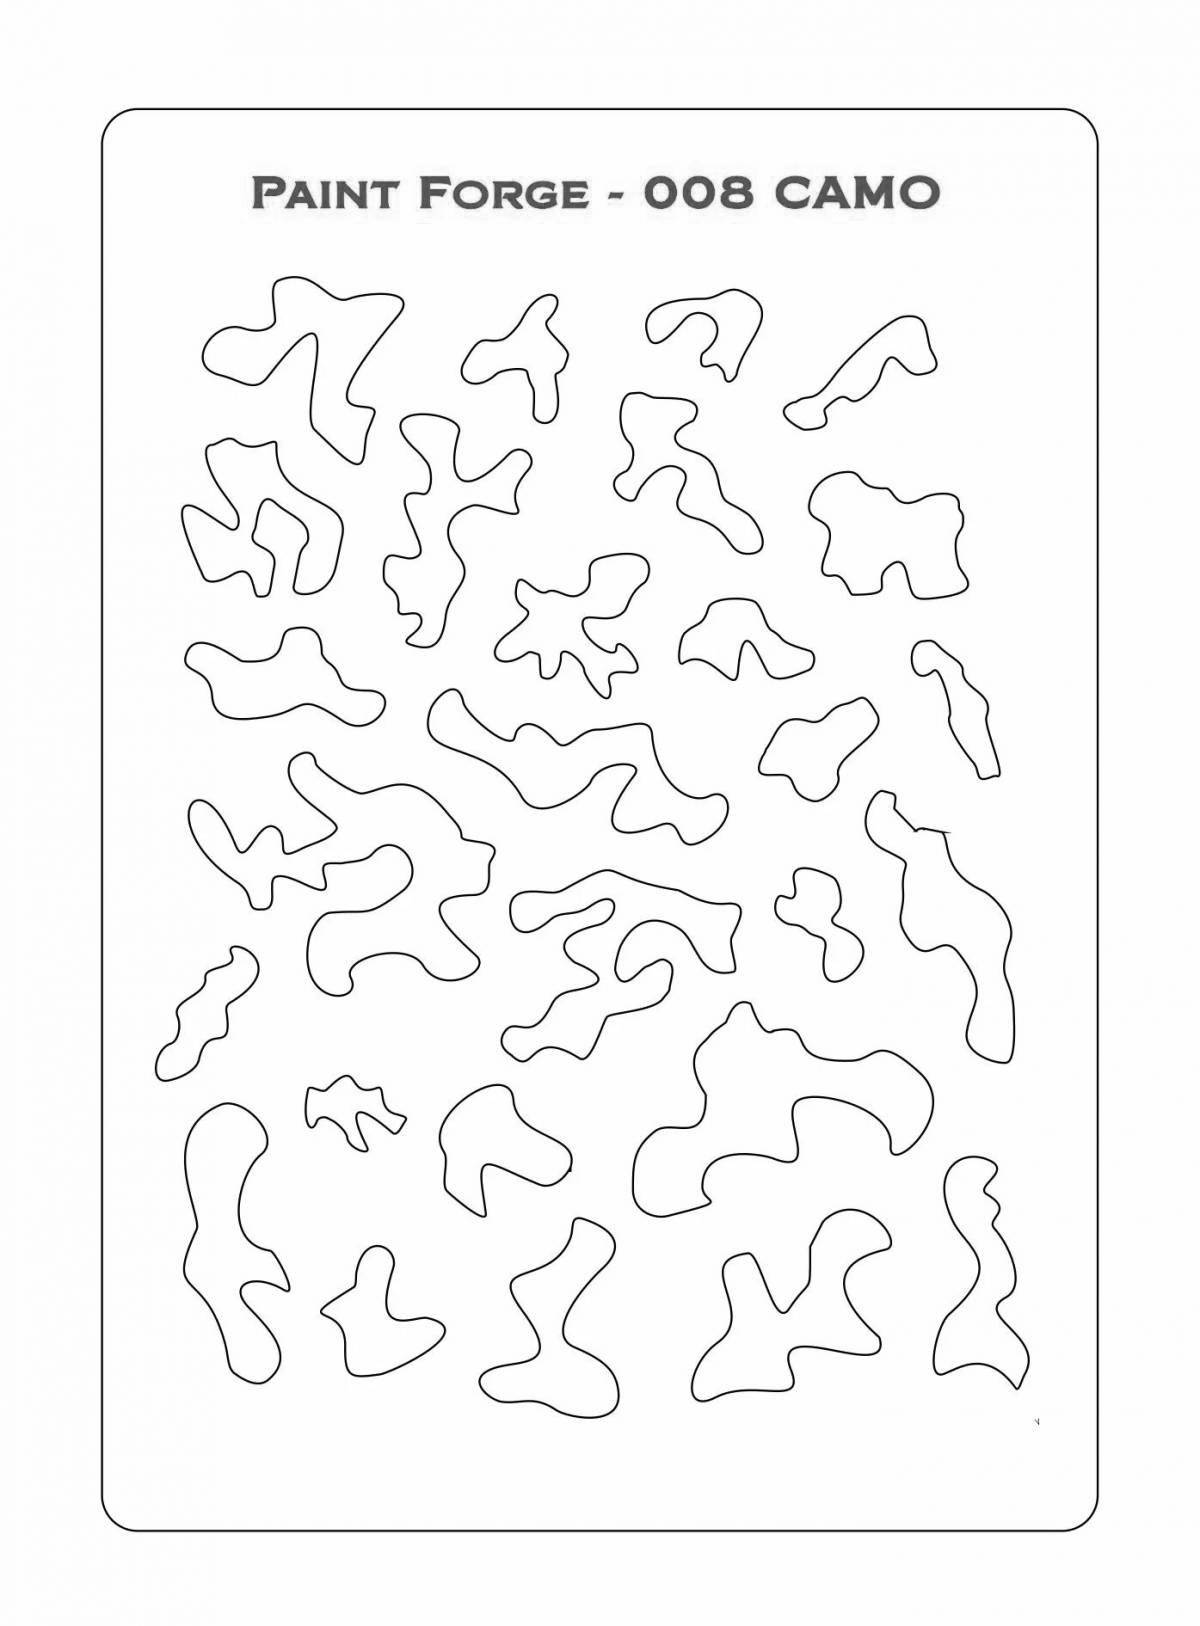 Charming camouflage coloring page